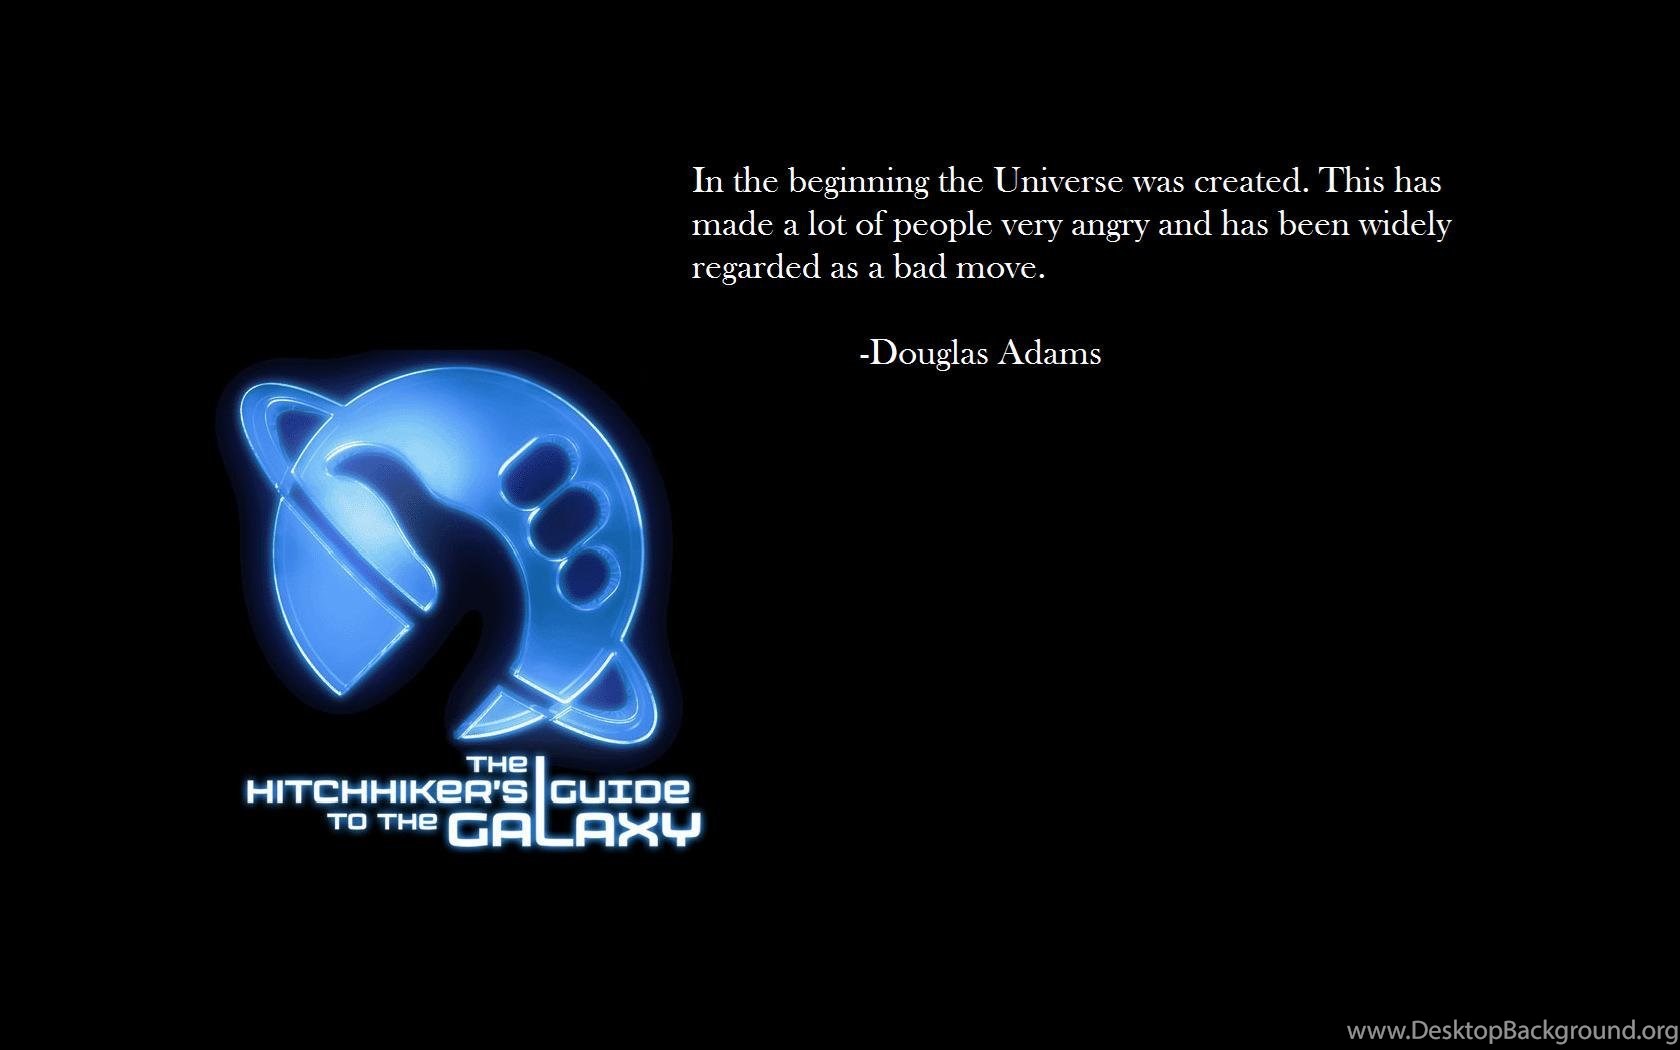 Douglas Adams The Hitchhikers Guide To The Galaxy Wallpaper. Desktop Background